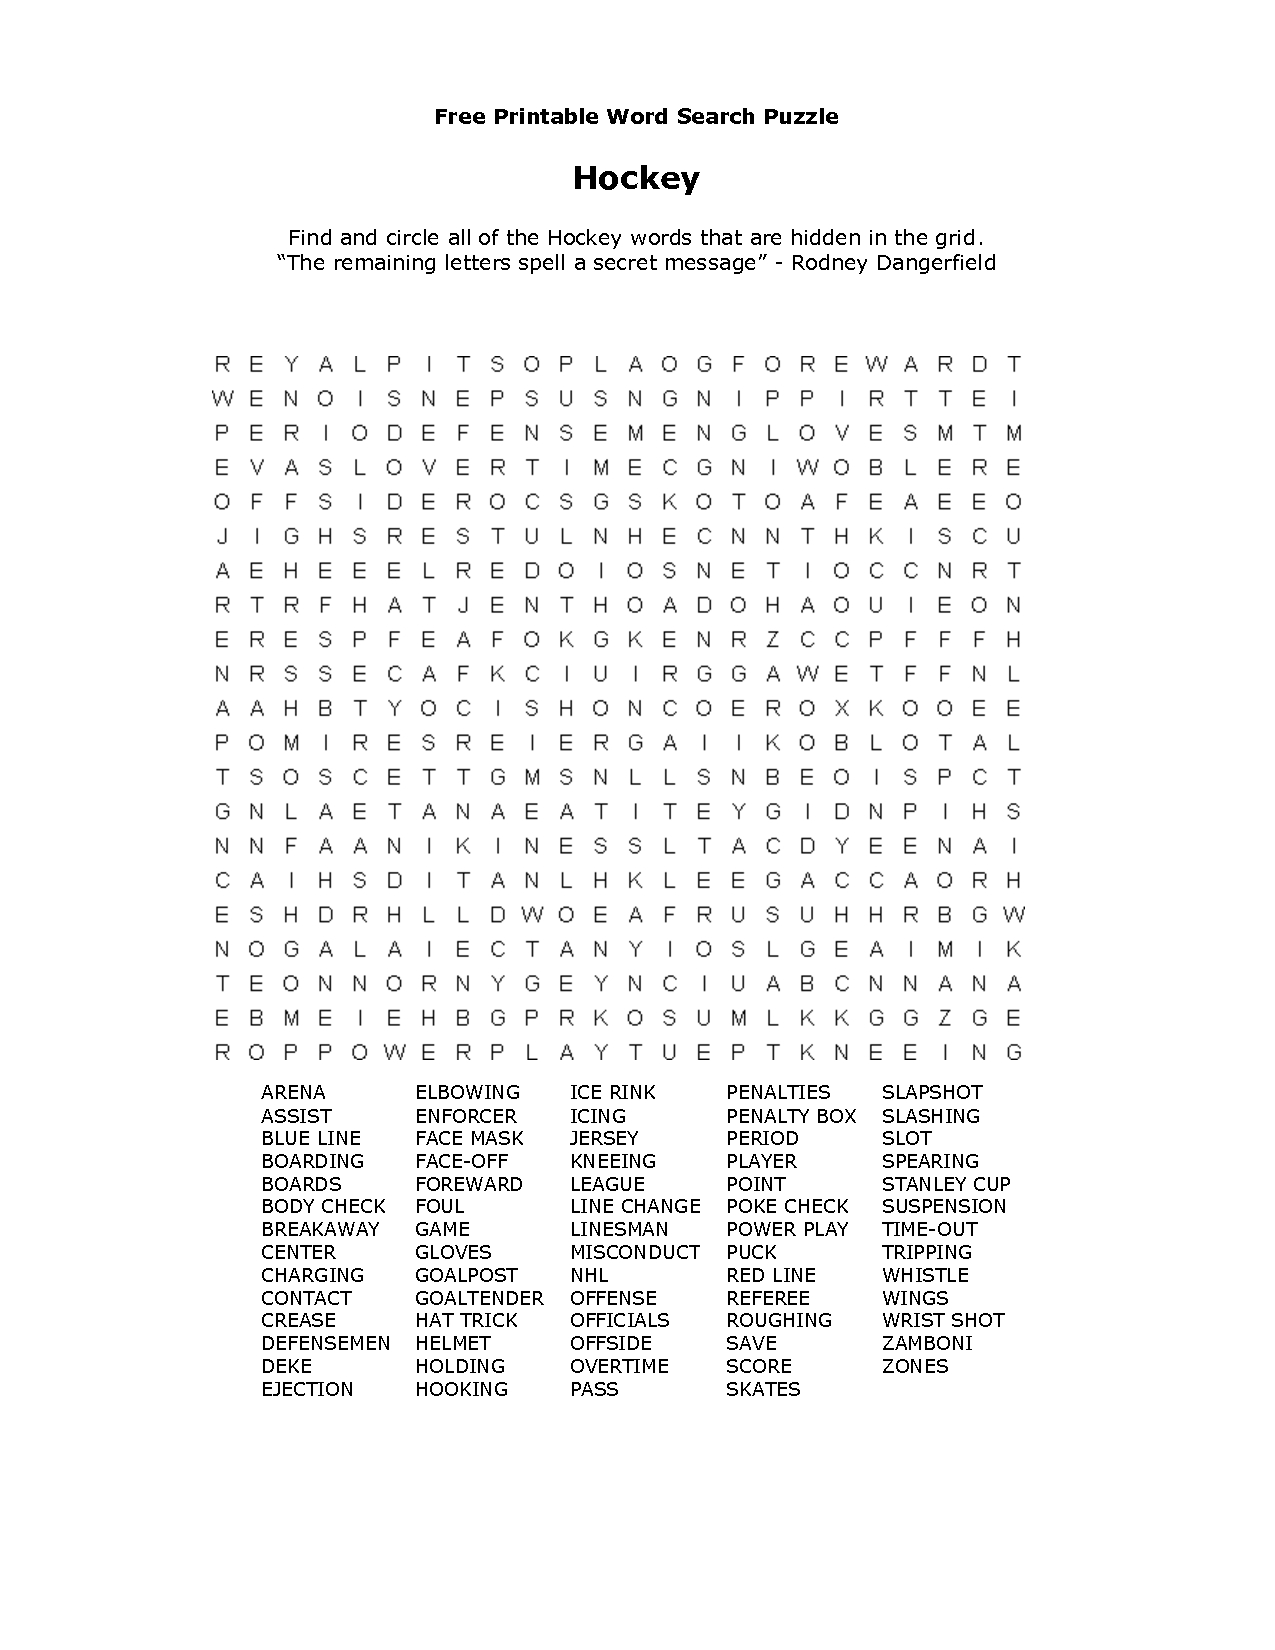 Free Printable Word Searches | طلال | Free Printable Word Searches - Printable Hockey Crossword Puzzles